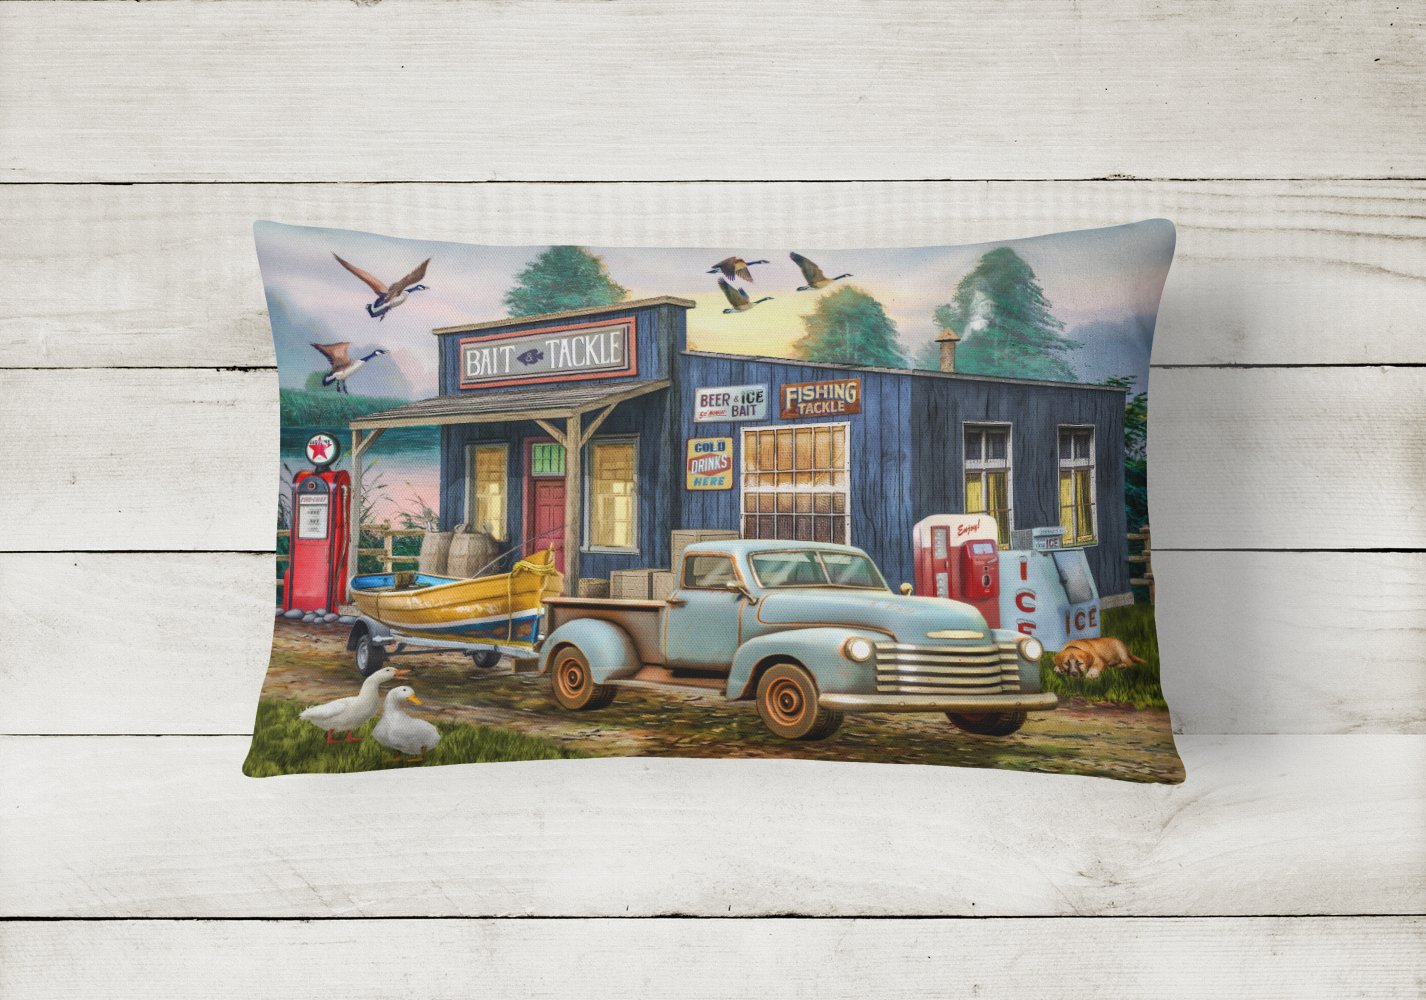 Early Bird Catches the Fish Bait Shop Canvas Fabric Decorative Pillow PTW2065PW1216 by Caroline's Treasures